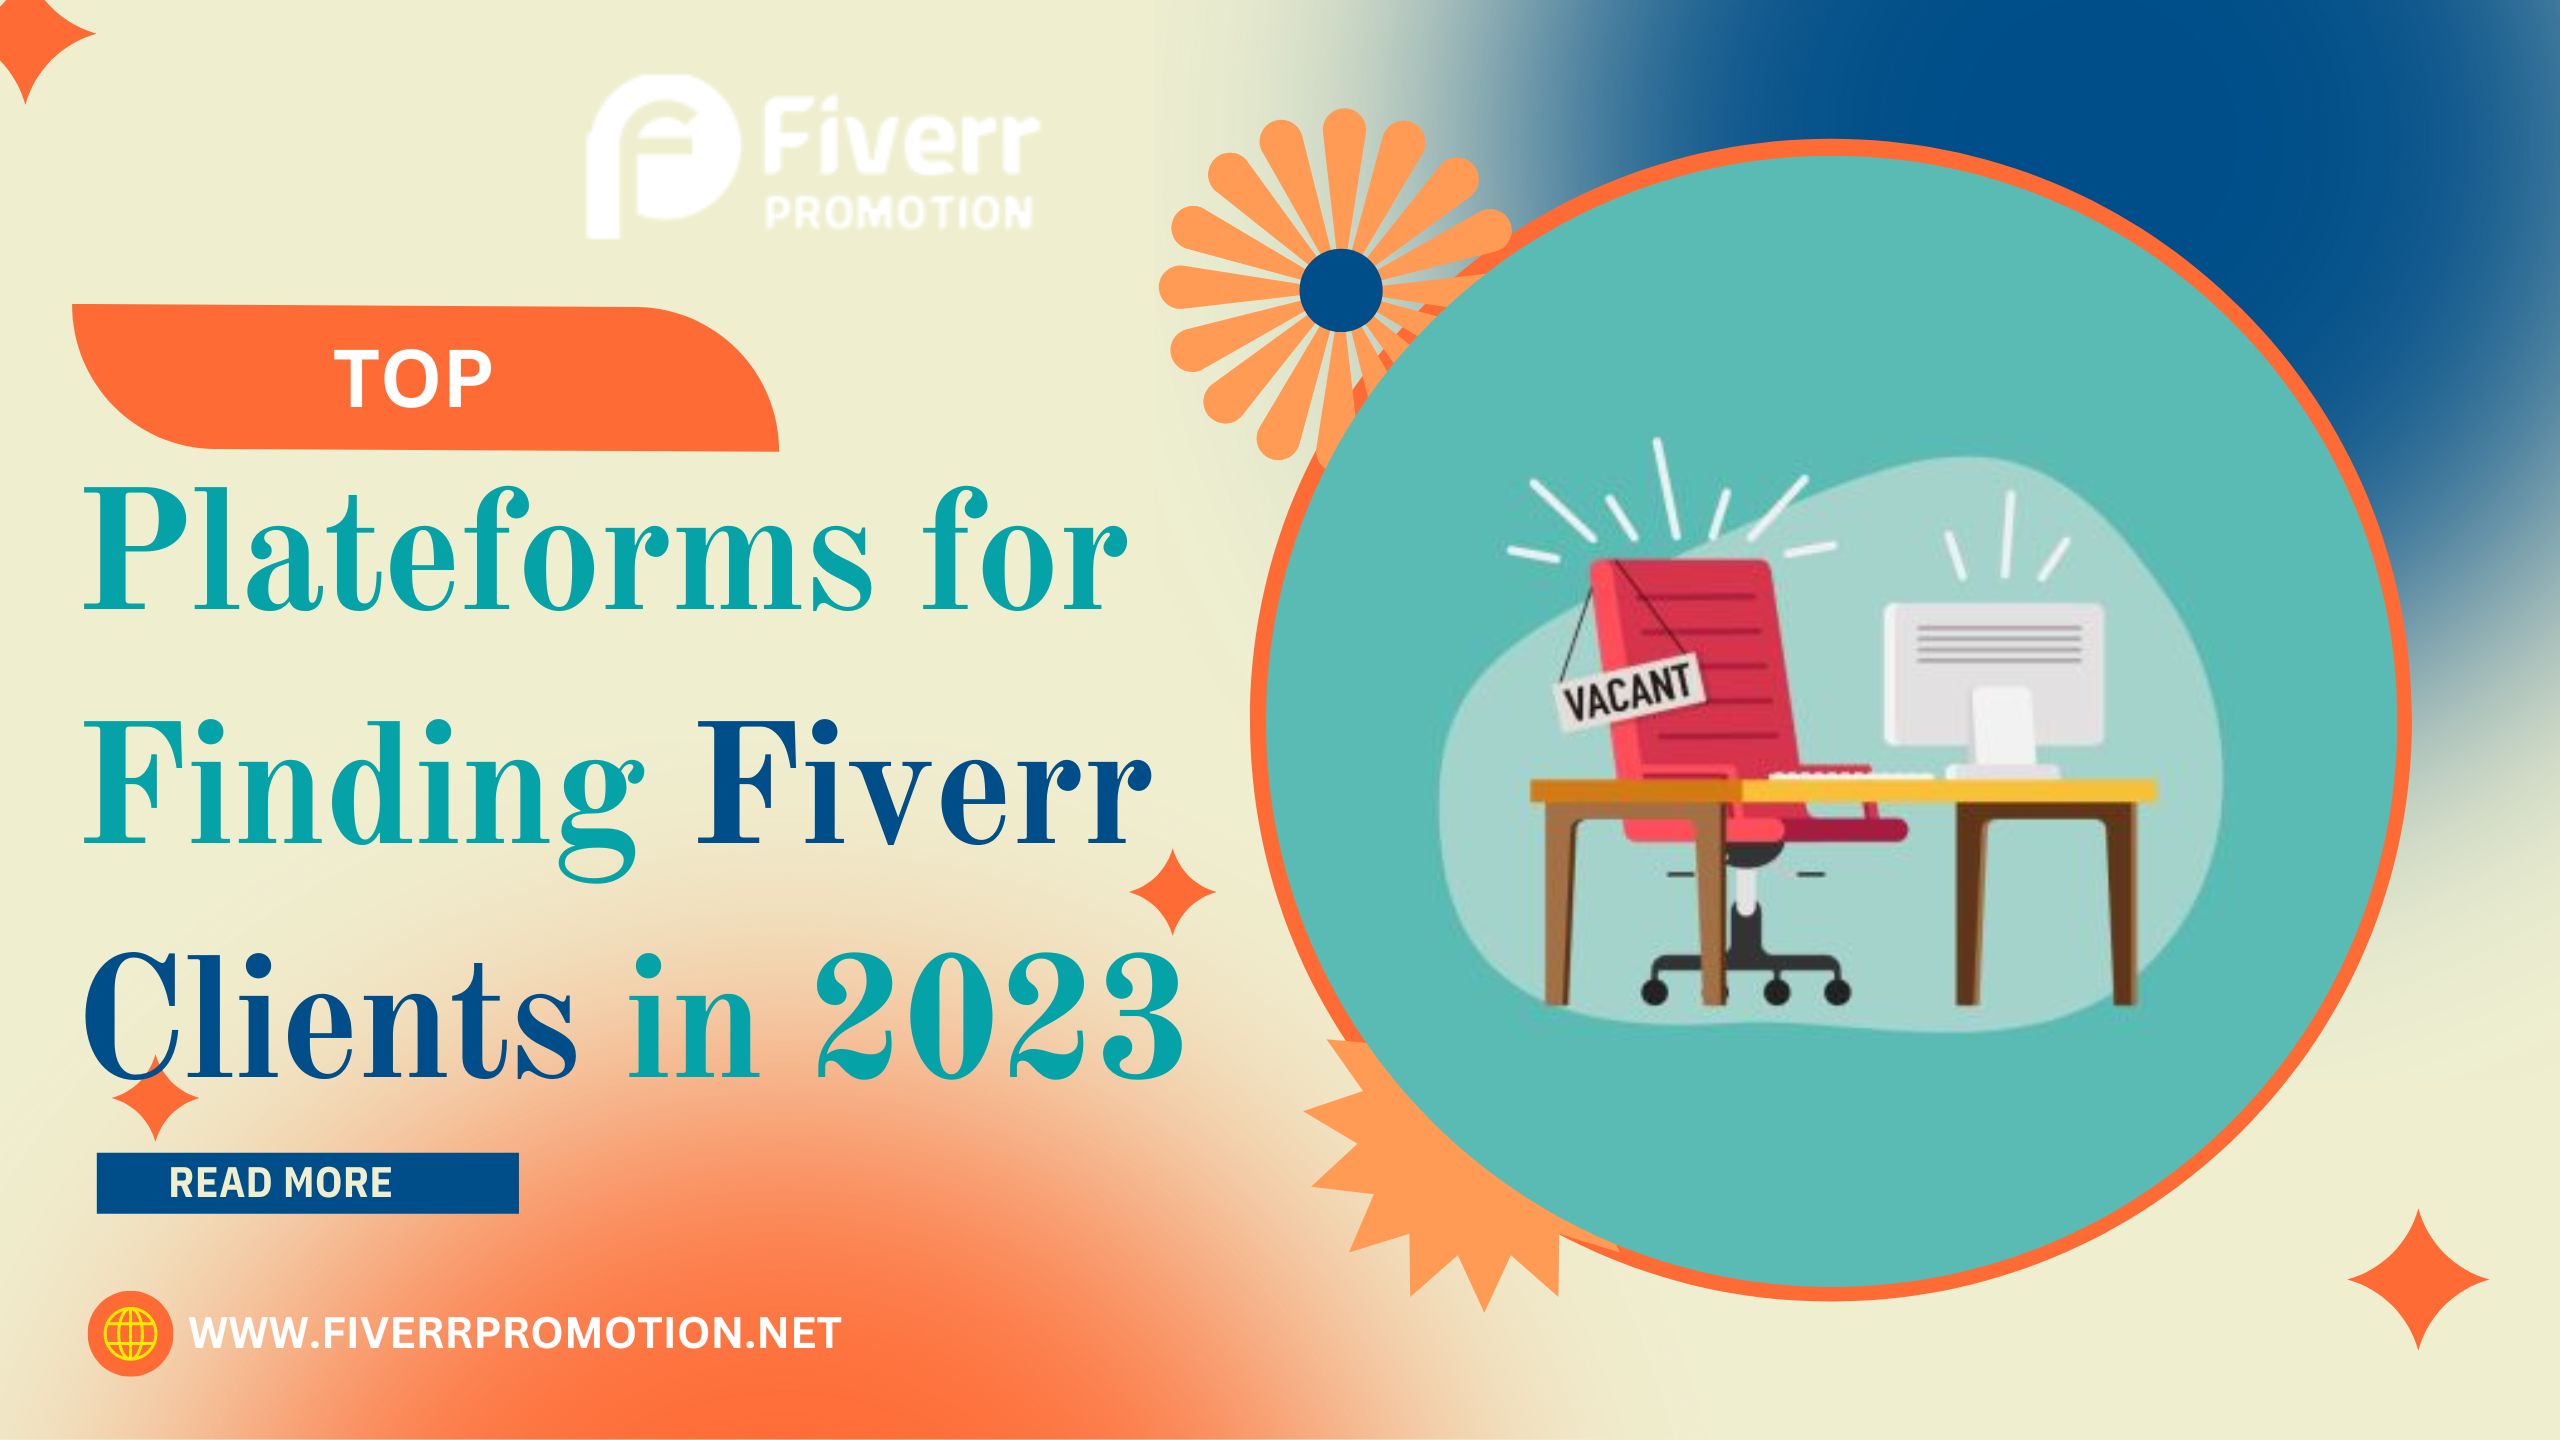 Top Plateforms for Finding Fiverr Clients in 2023